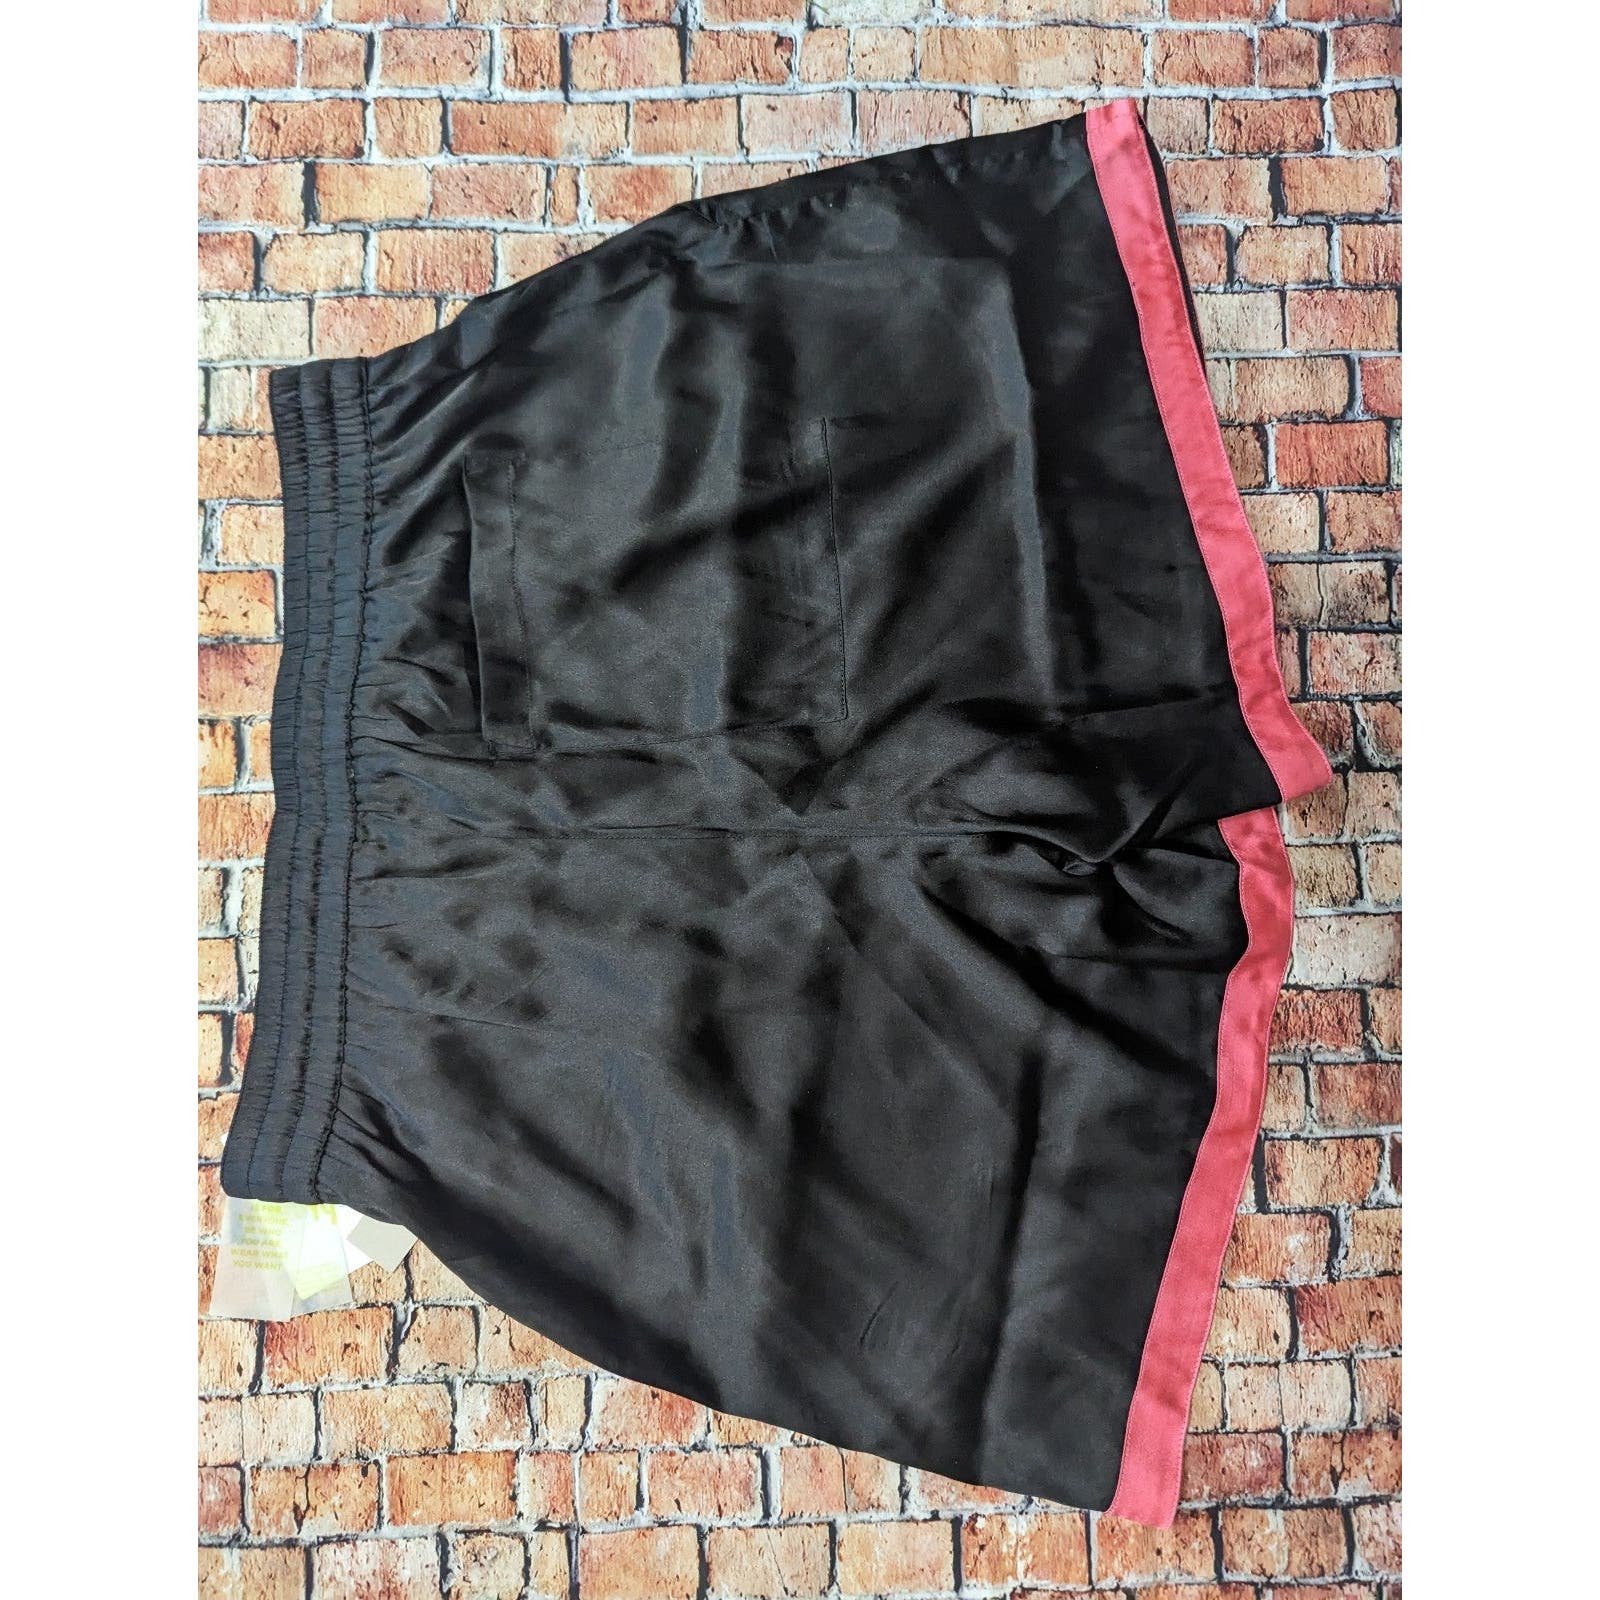 Latest  NWTBe Proud By Bp. Gender Inclusive Boxing Shorts In Black- Pink Combo size NgIo3OvDU just for you